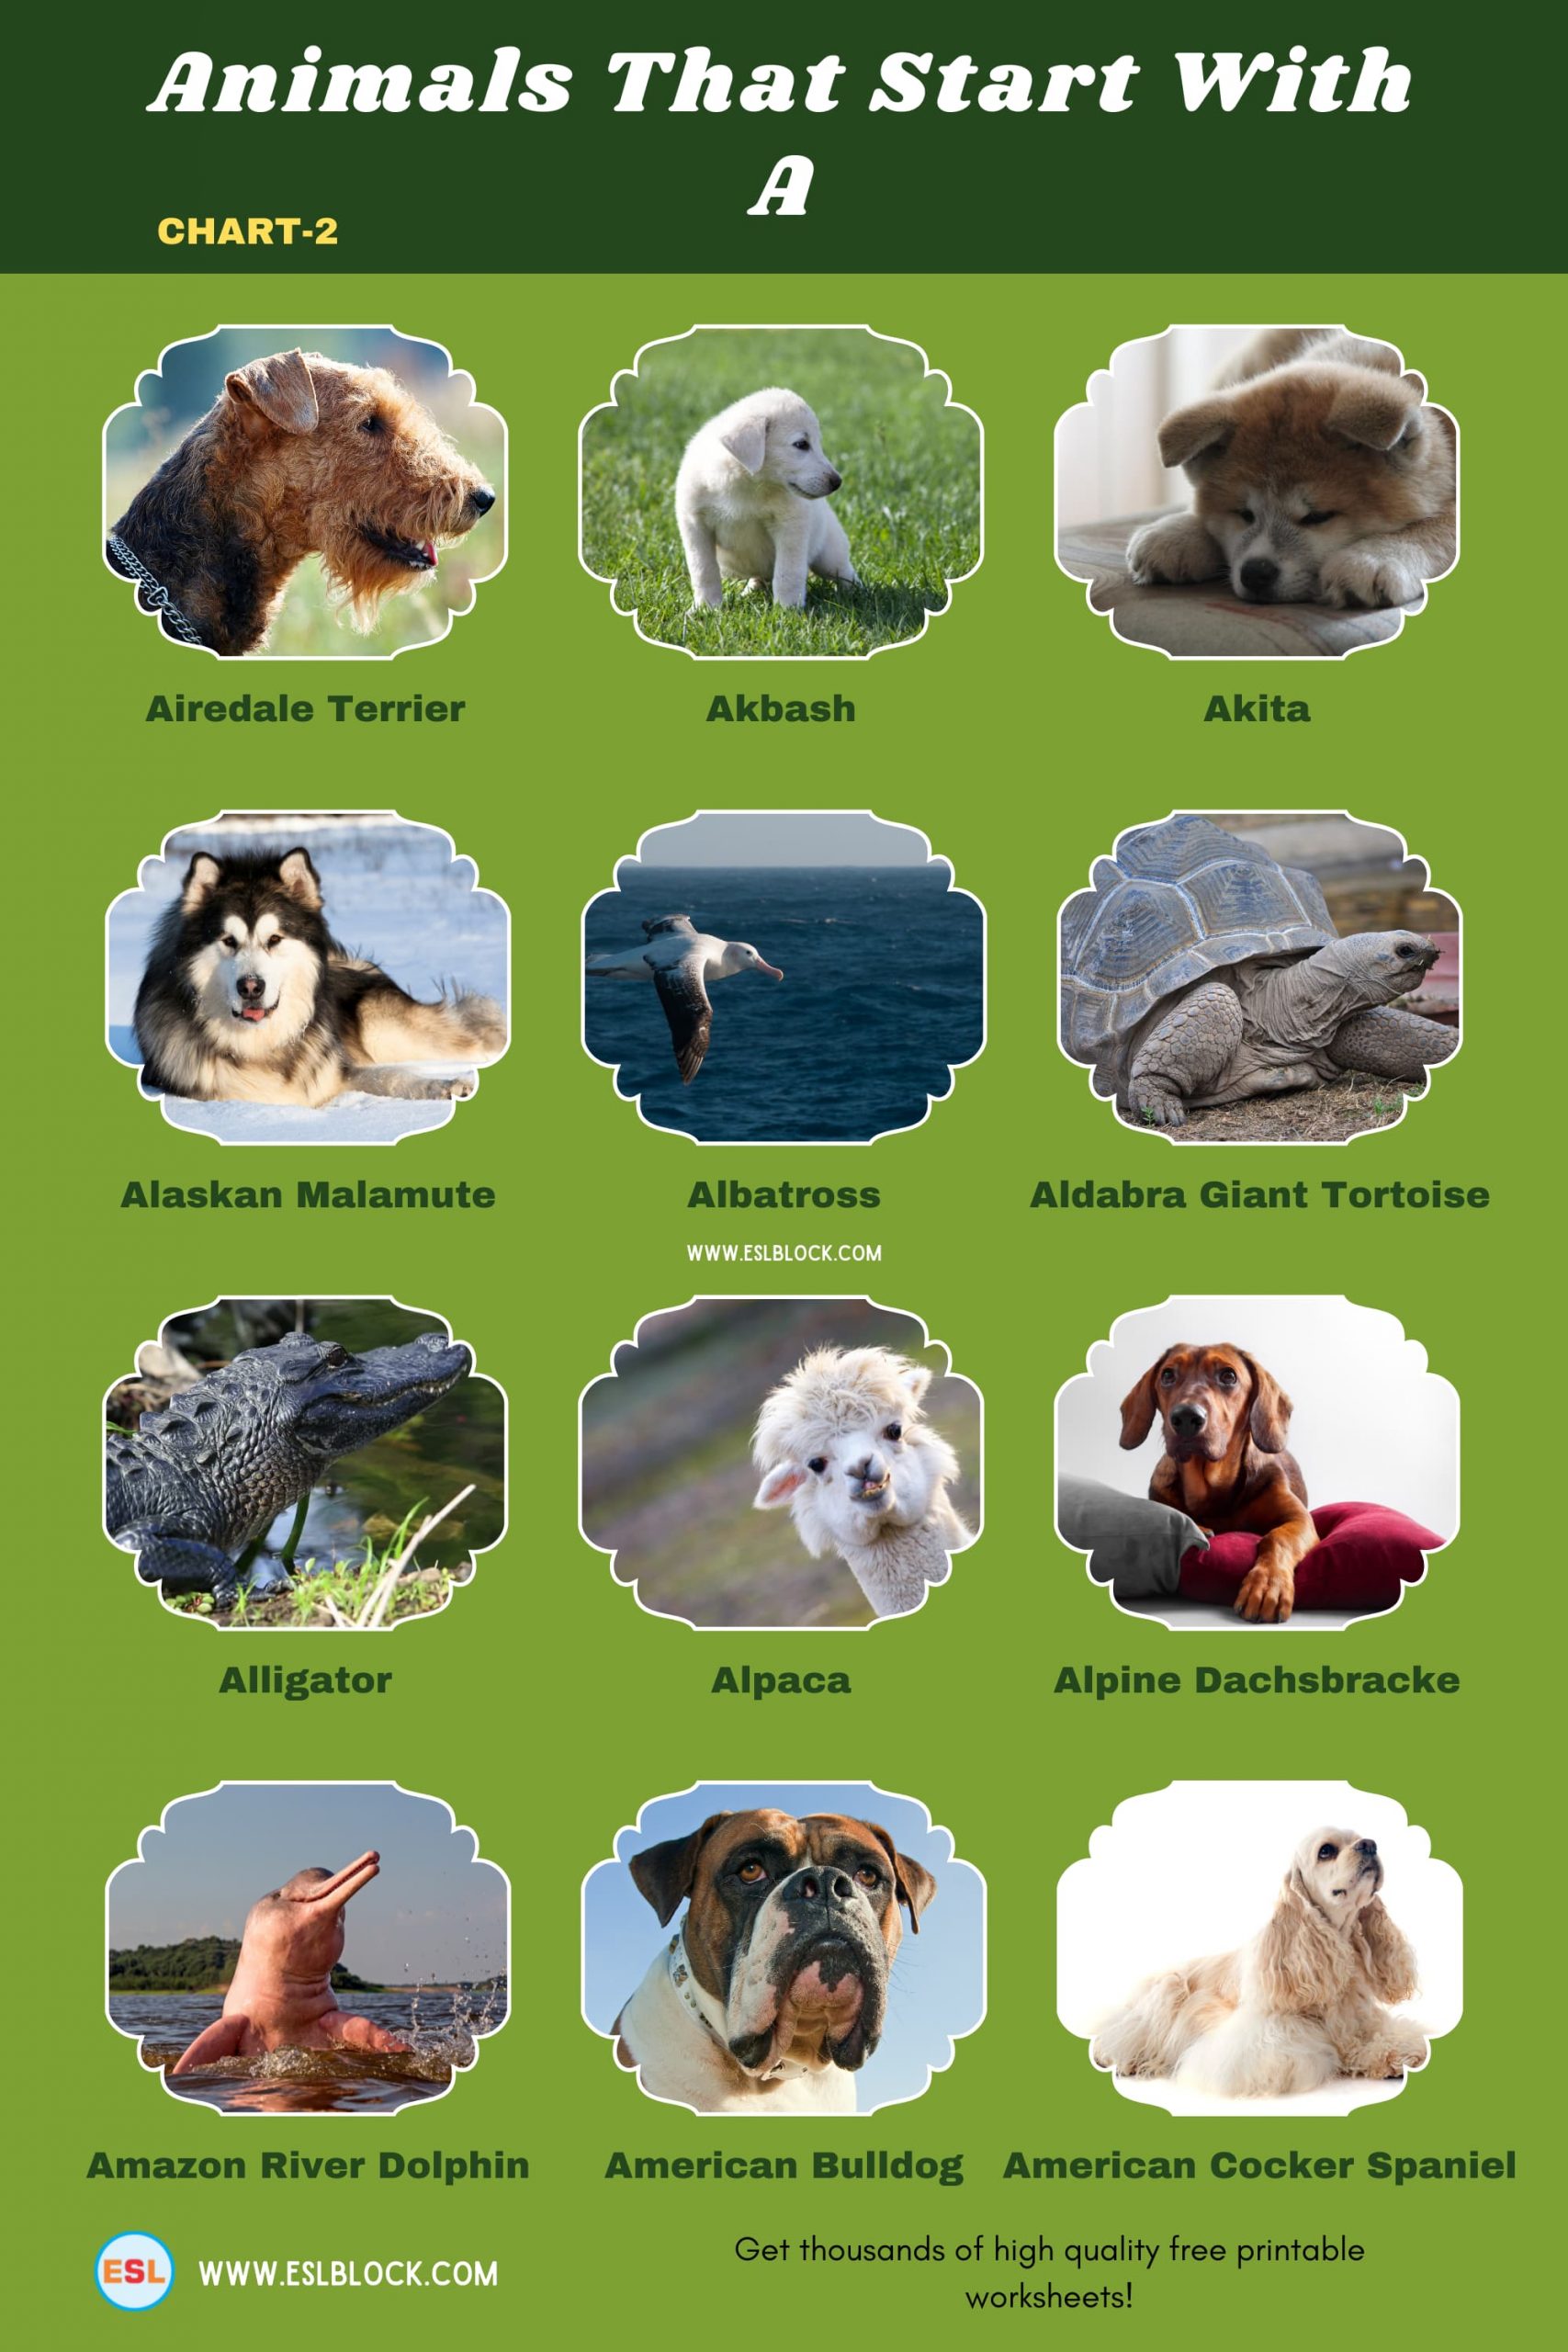 5 Letter Animals Starting With A, A Animals, A Animals in English, A Animals Names, Animals List, Animals Names, Animals That Begins With A, Animals That Start With A, English, English Nouns, English Vocabulary, English Words, List of Animals That Start With A, Nouns, Vocabulary